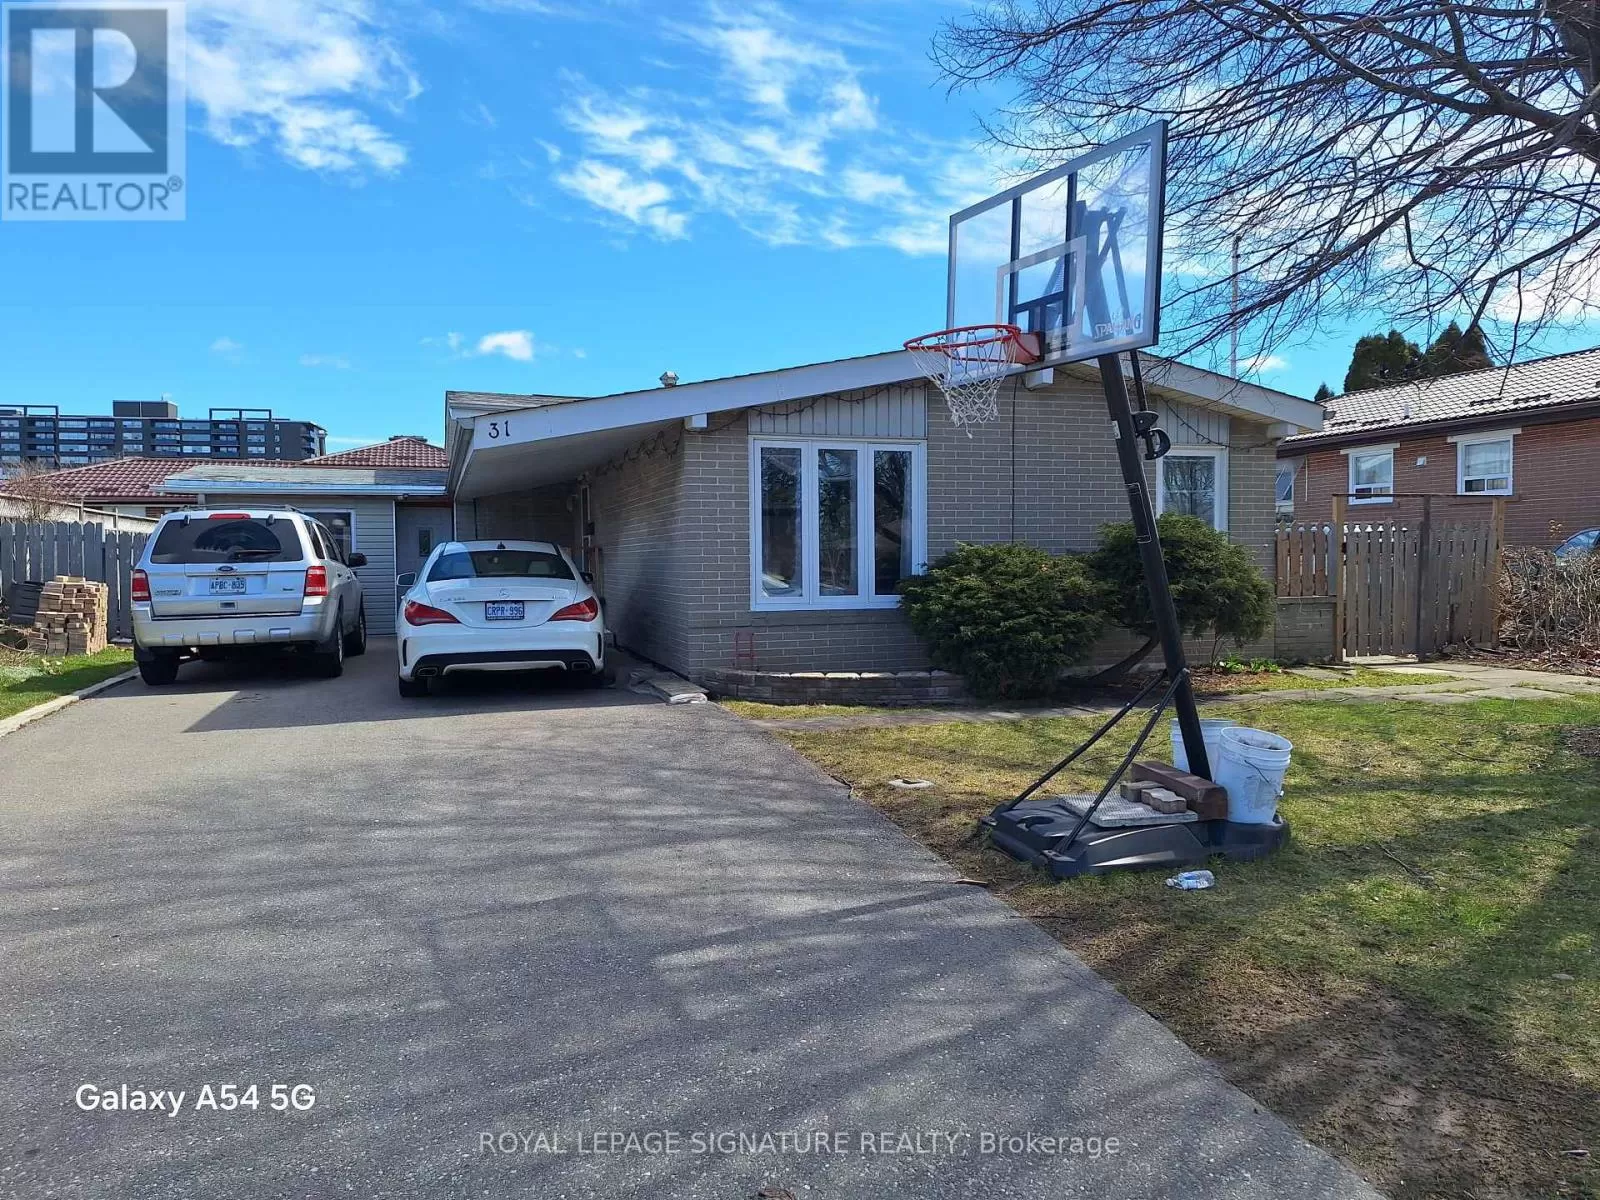 House for rent: Bsmt - 31 Secroft Crescent, Toronto, Ontario M3N 1R5